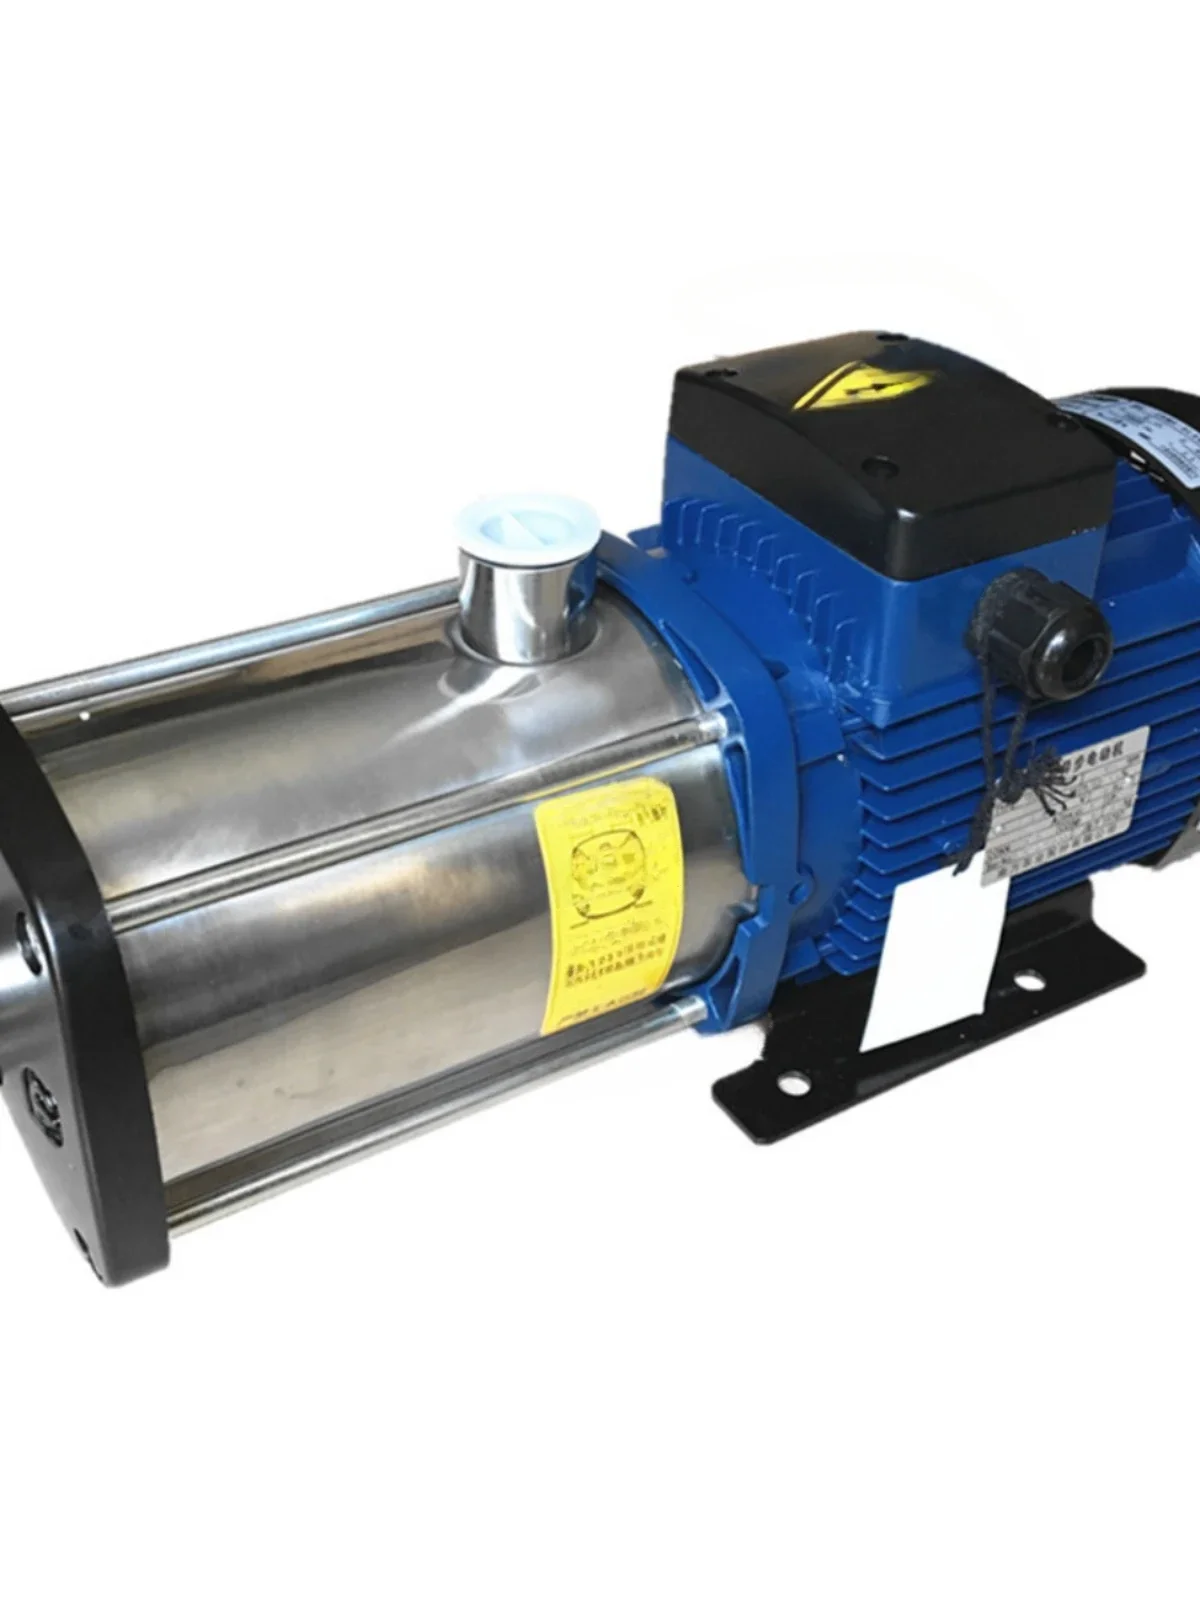 

Water Pump CHM1-2-4-8-12-16-20 Horizontal Stainless Steel Multistage Centrifugal Air Conditioning Booster Pump